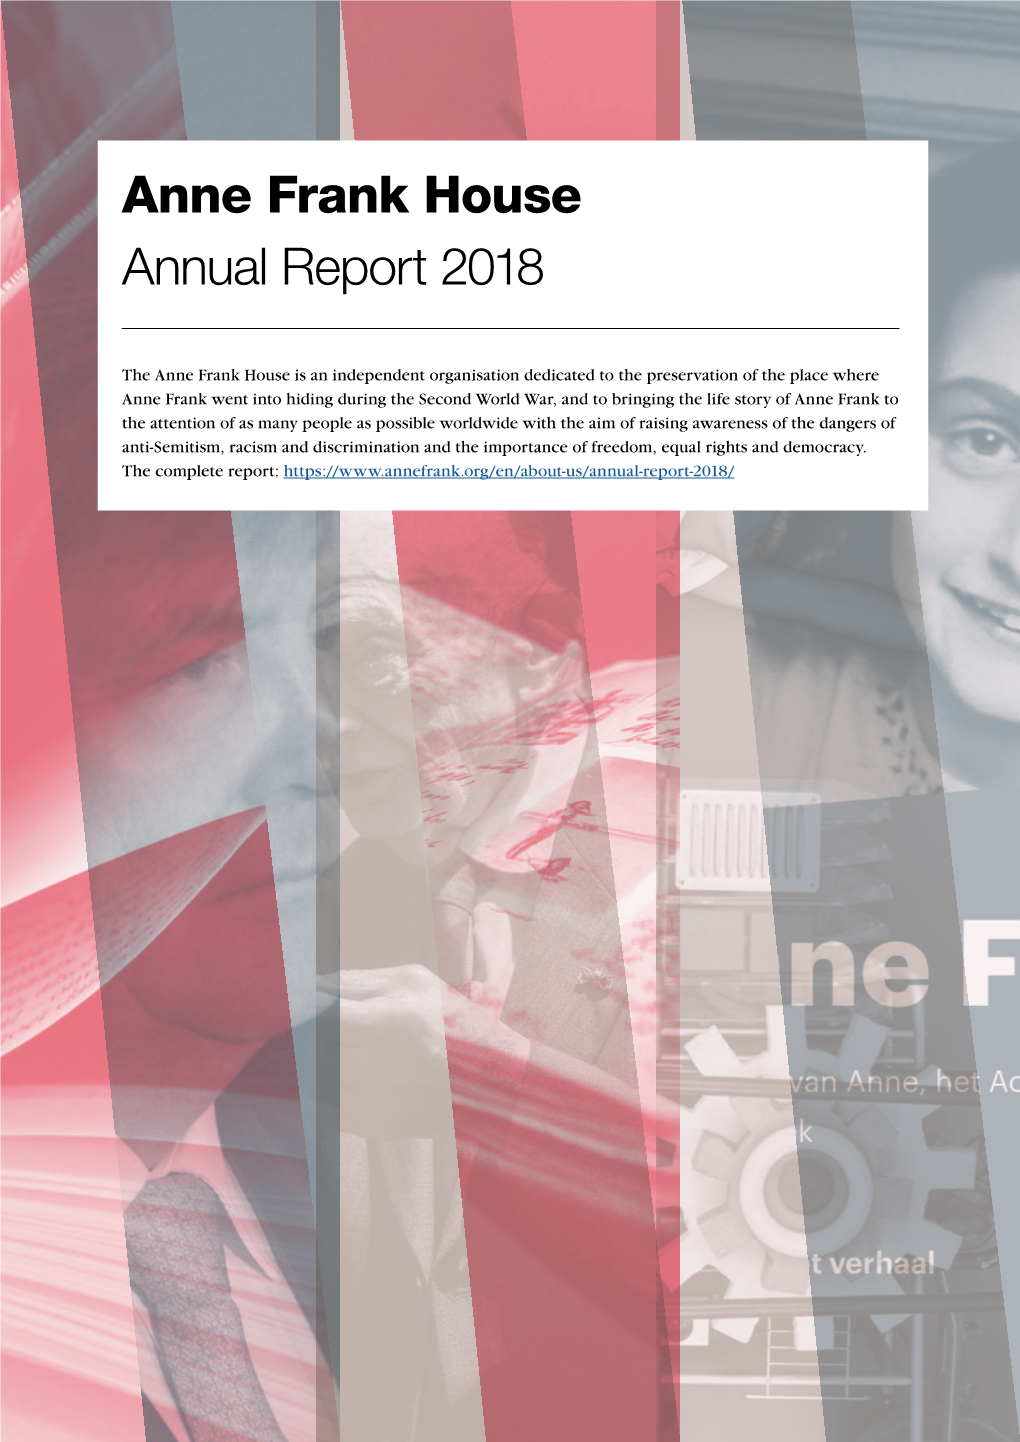 Anne Frank House Annual Report 2018